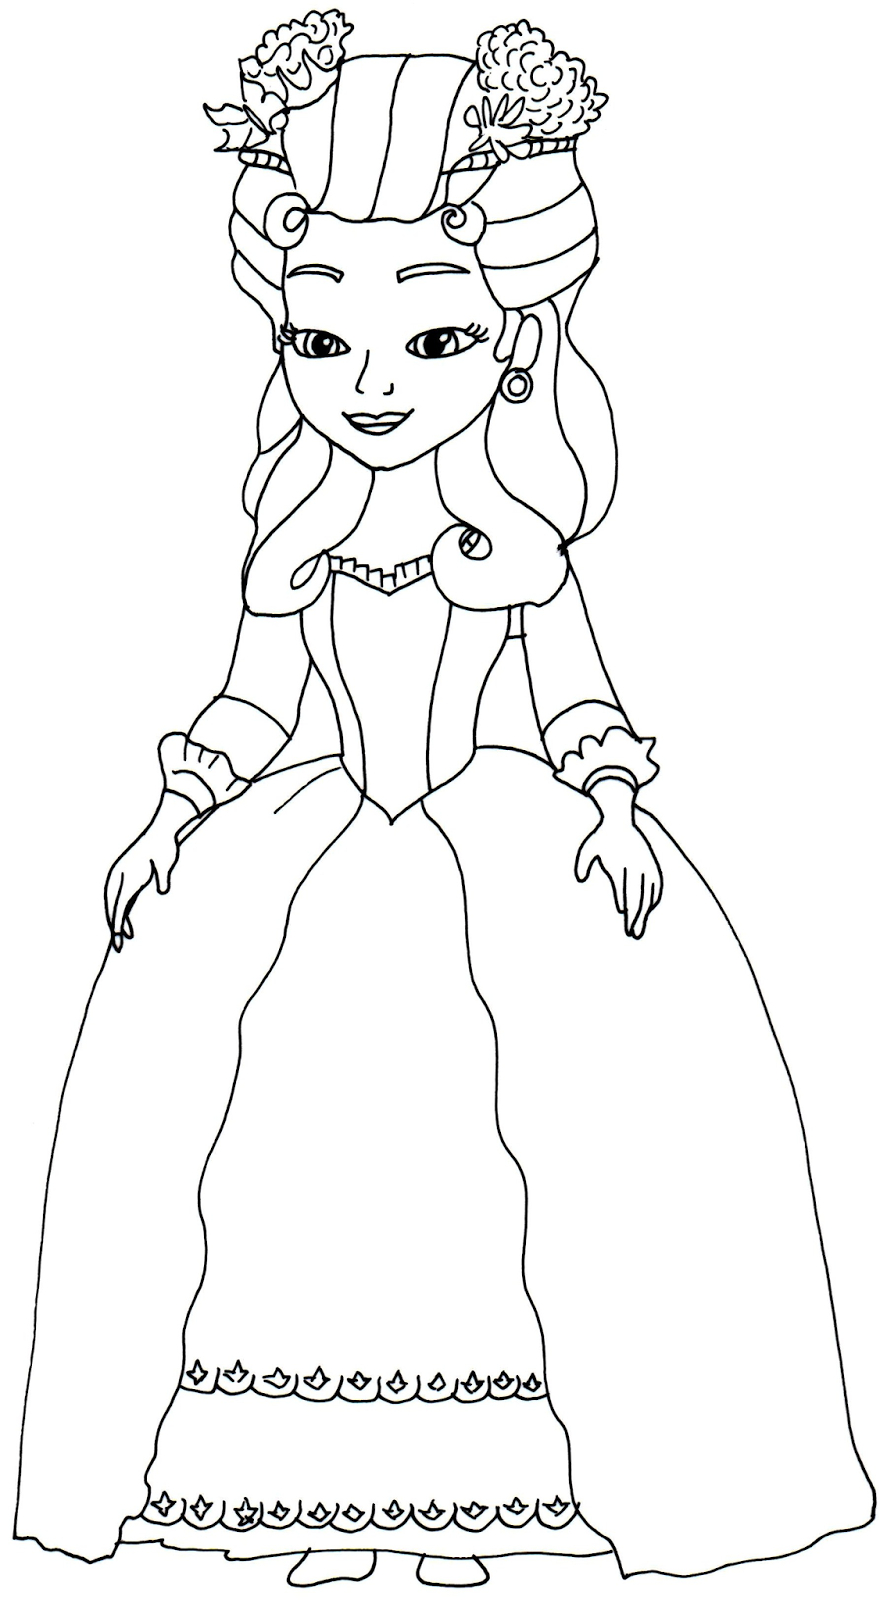 princess hildegard  sofia the first coloring page mit